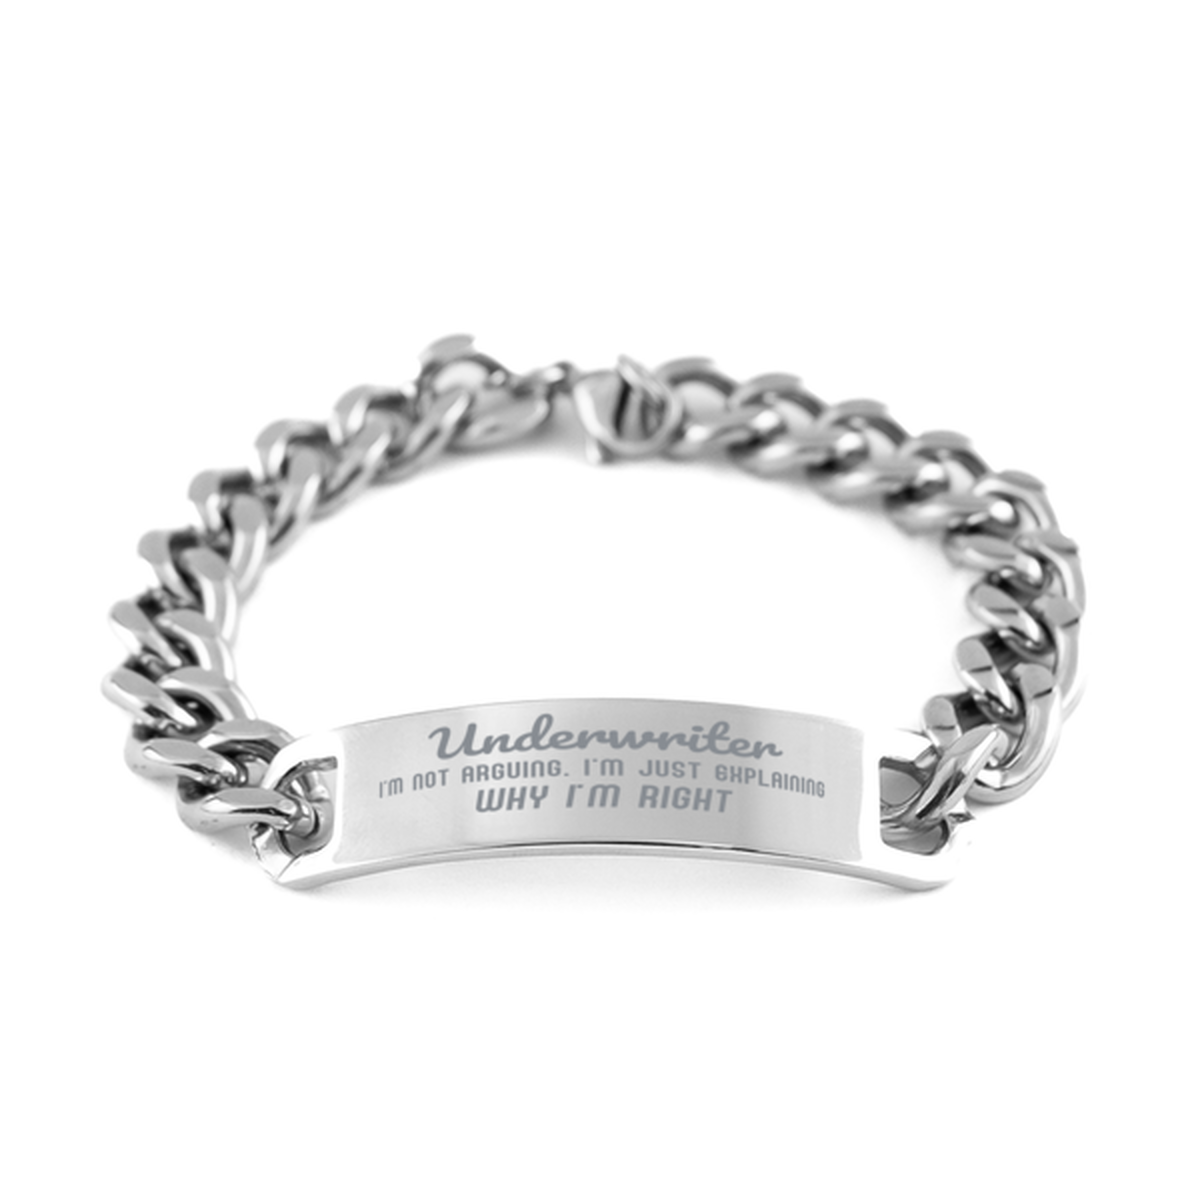 Underwriter I'm not Arguing. I'm Just Explaining Why I'm RIGHT Cuban Chain Stainless Steel Bracelet, Graduation Birthday Christmas Underwriter Gifts For Underwriter Funny Saying Quote Present for Men Women Coworker